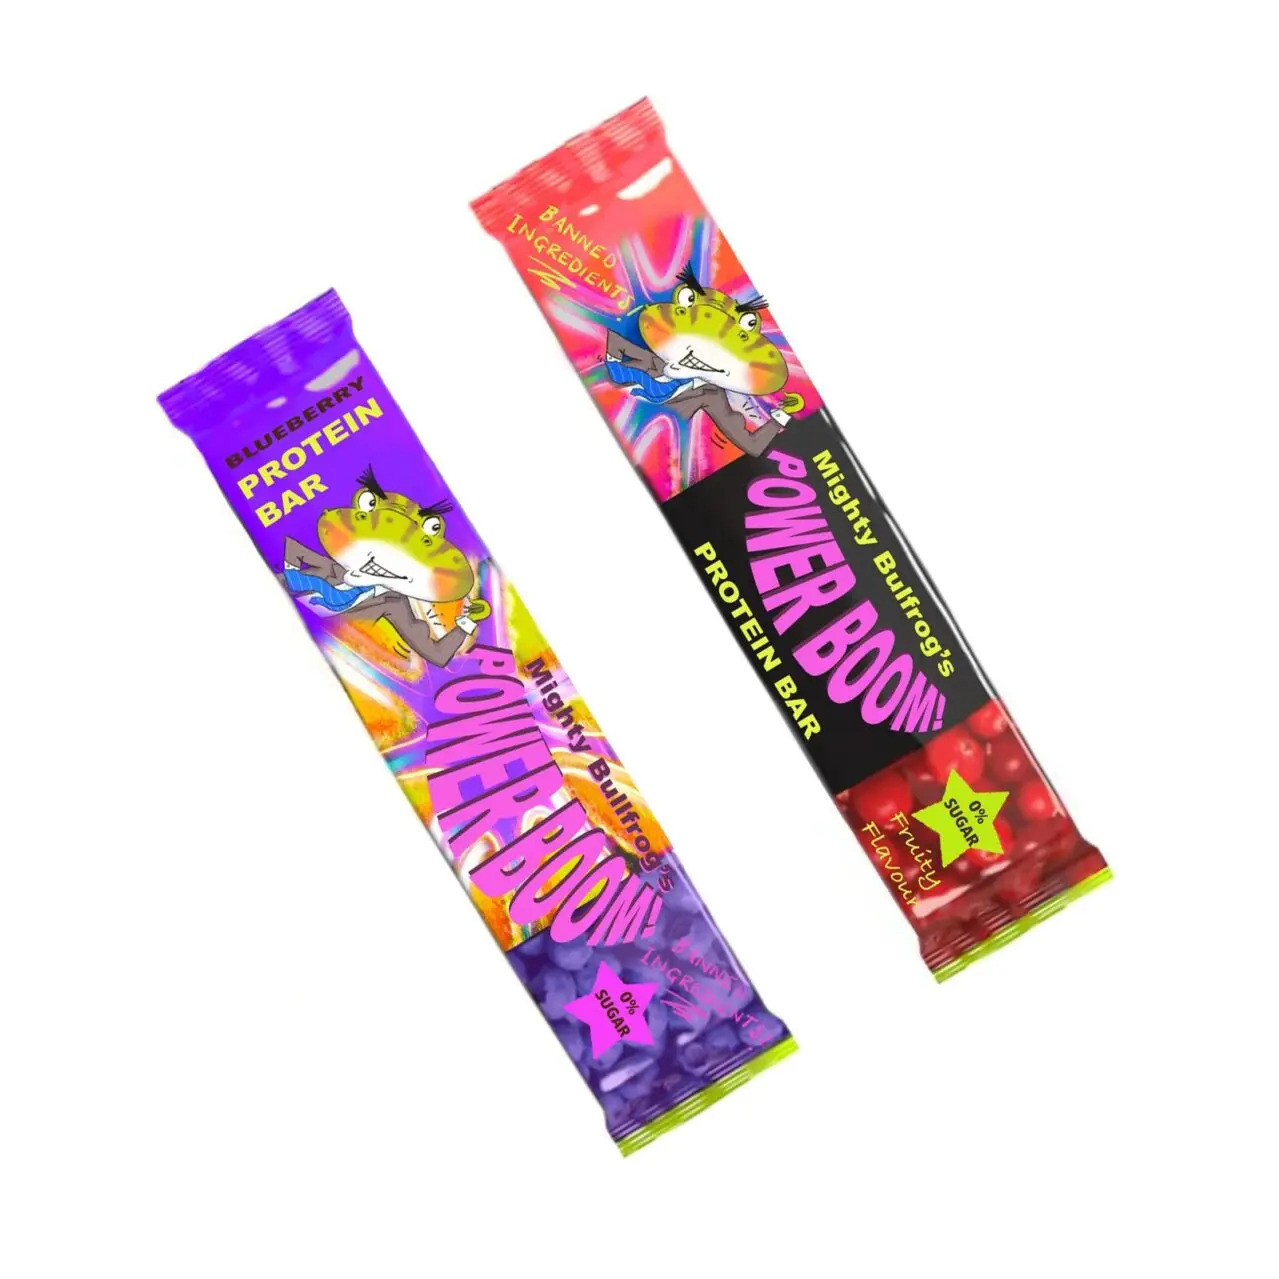 Two packages of fireworks are shown side by side.